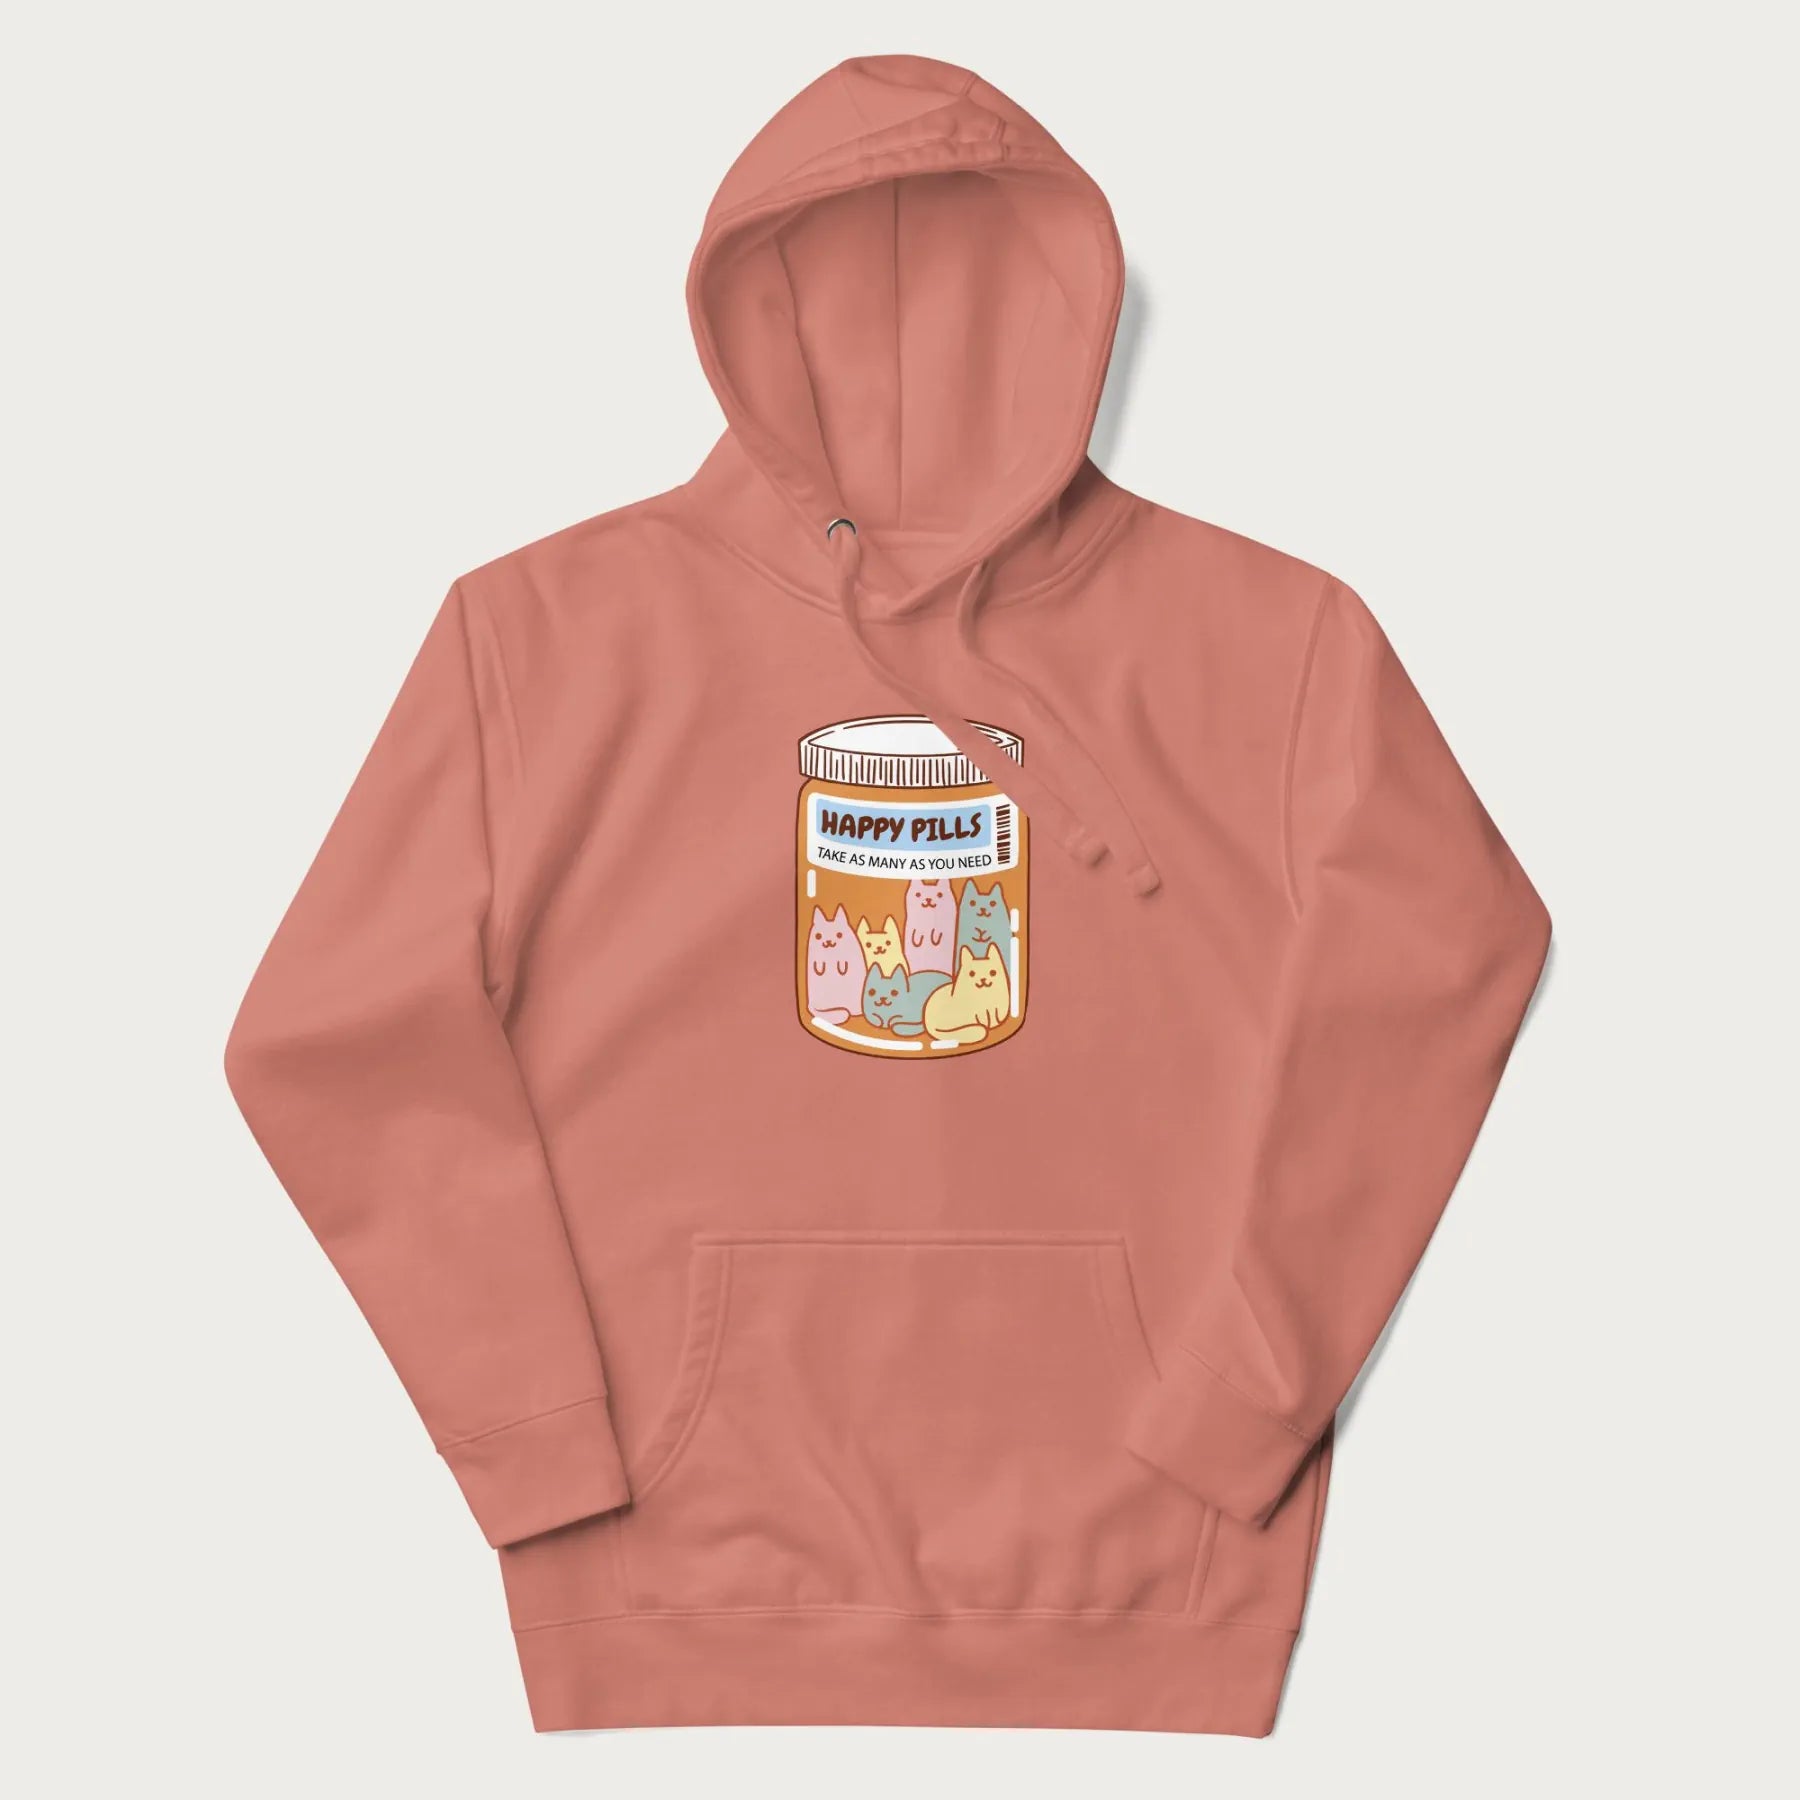 Cartoon cats in a pill bottle labeled 'Happy Pills' on a light pink hoodie.